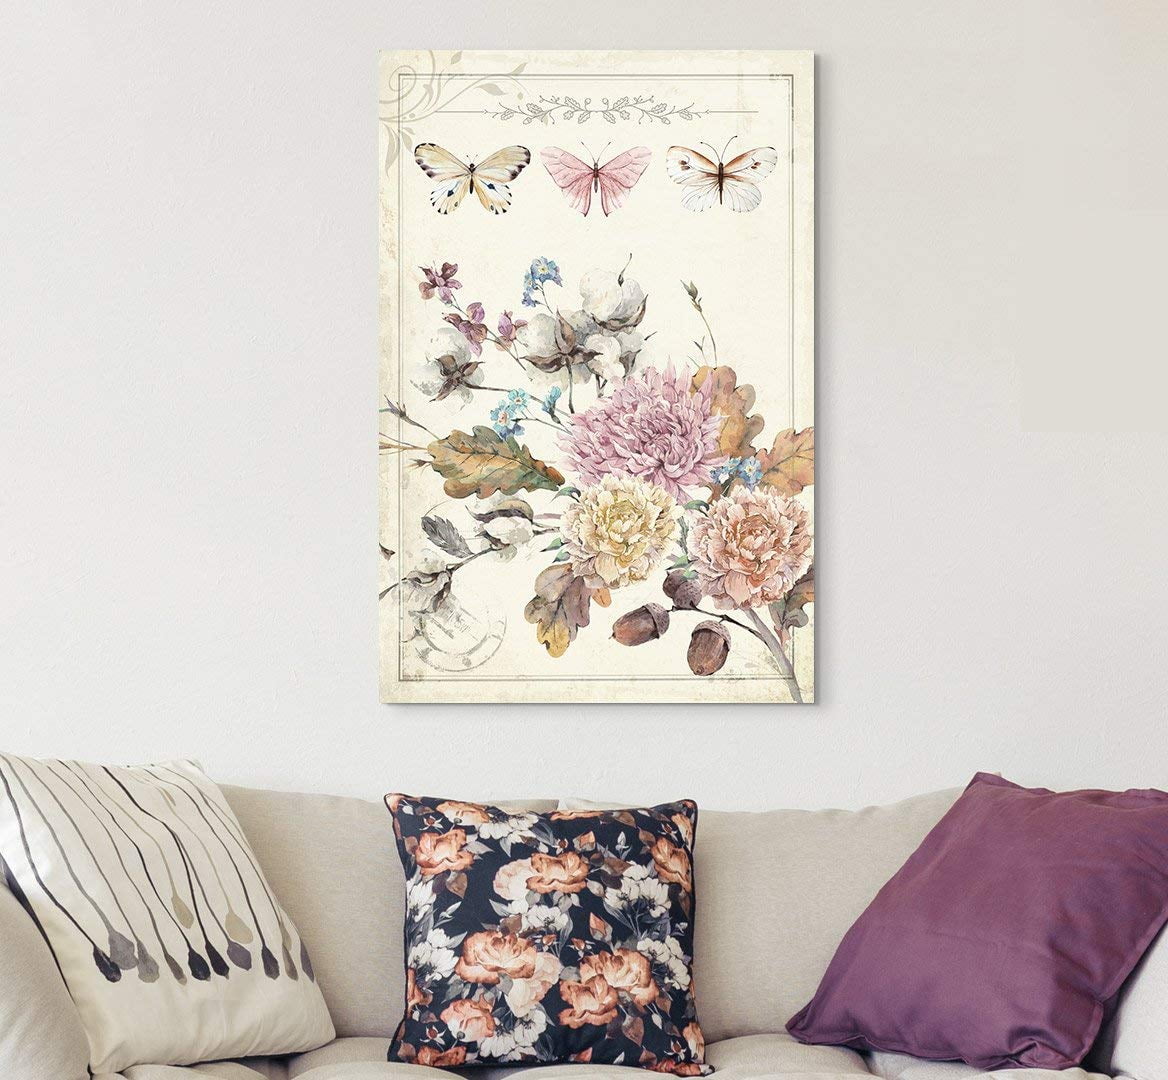 wall26 Canvas Wall Art - Vintage Style Colorful Flowers Butterflies ...